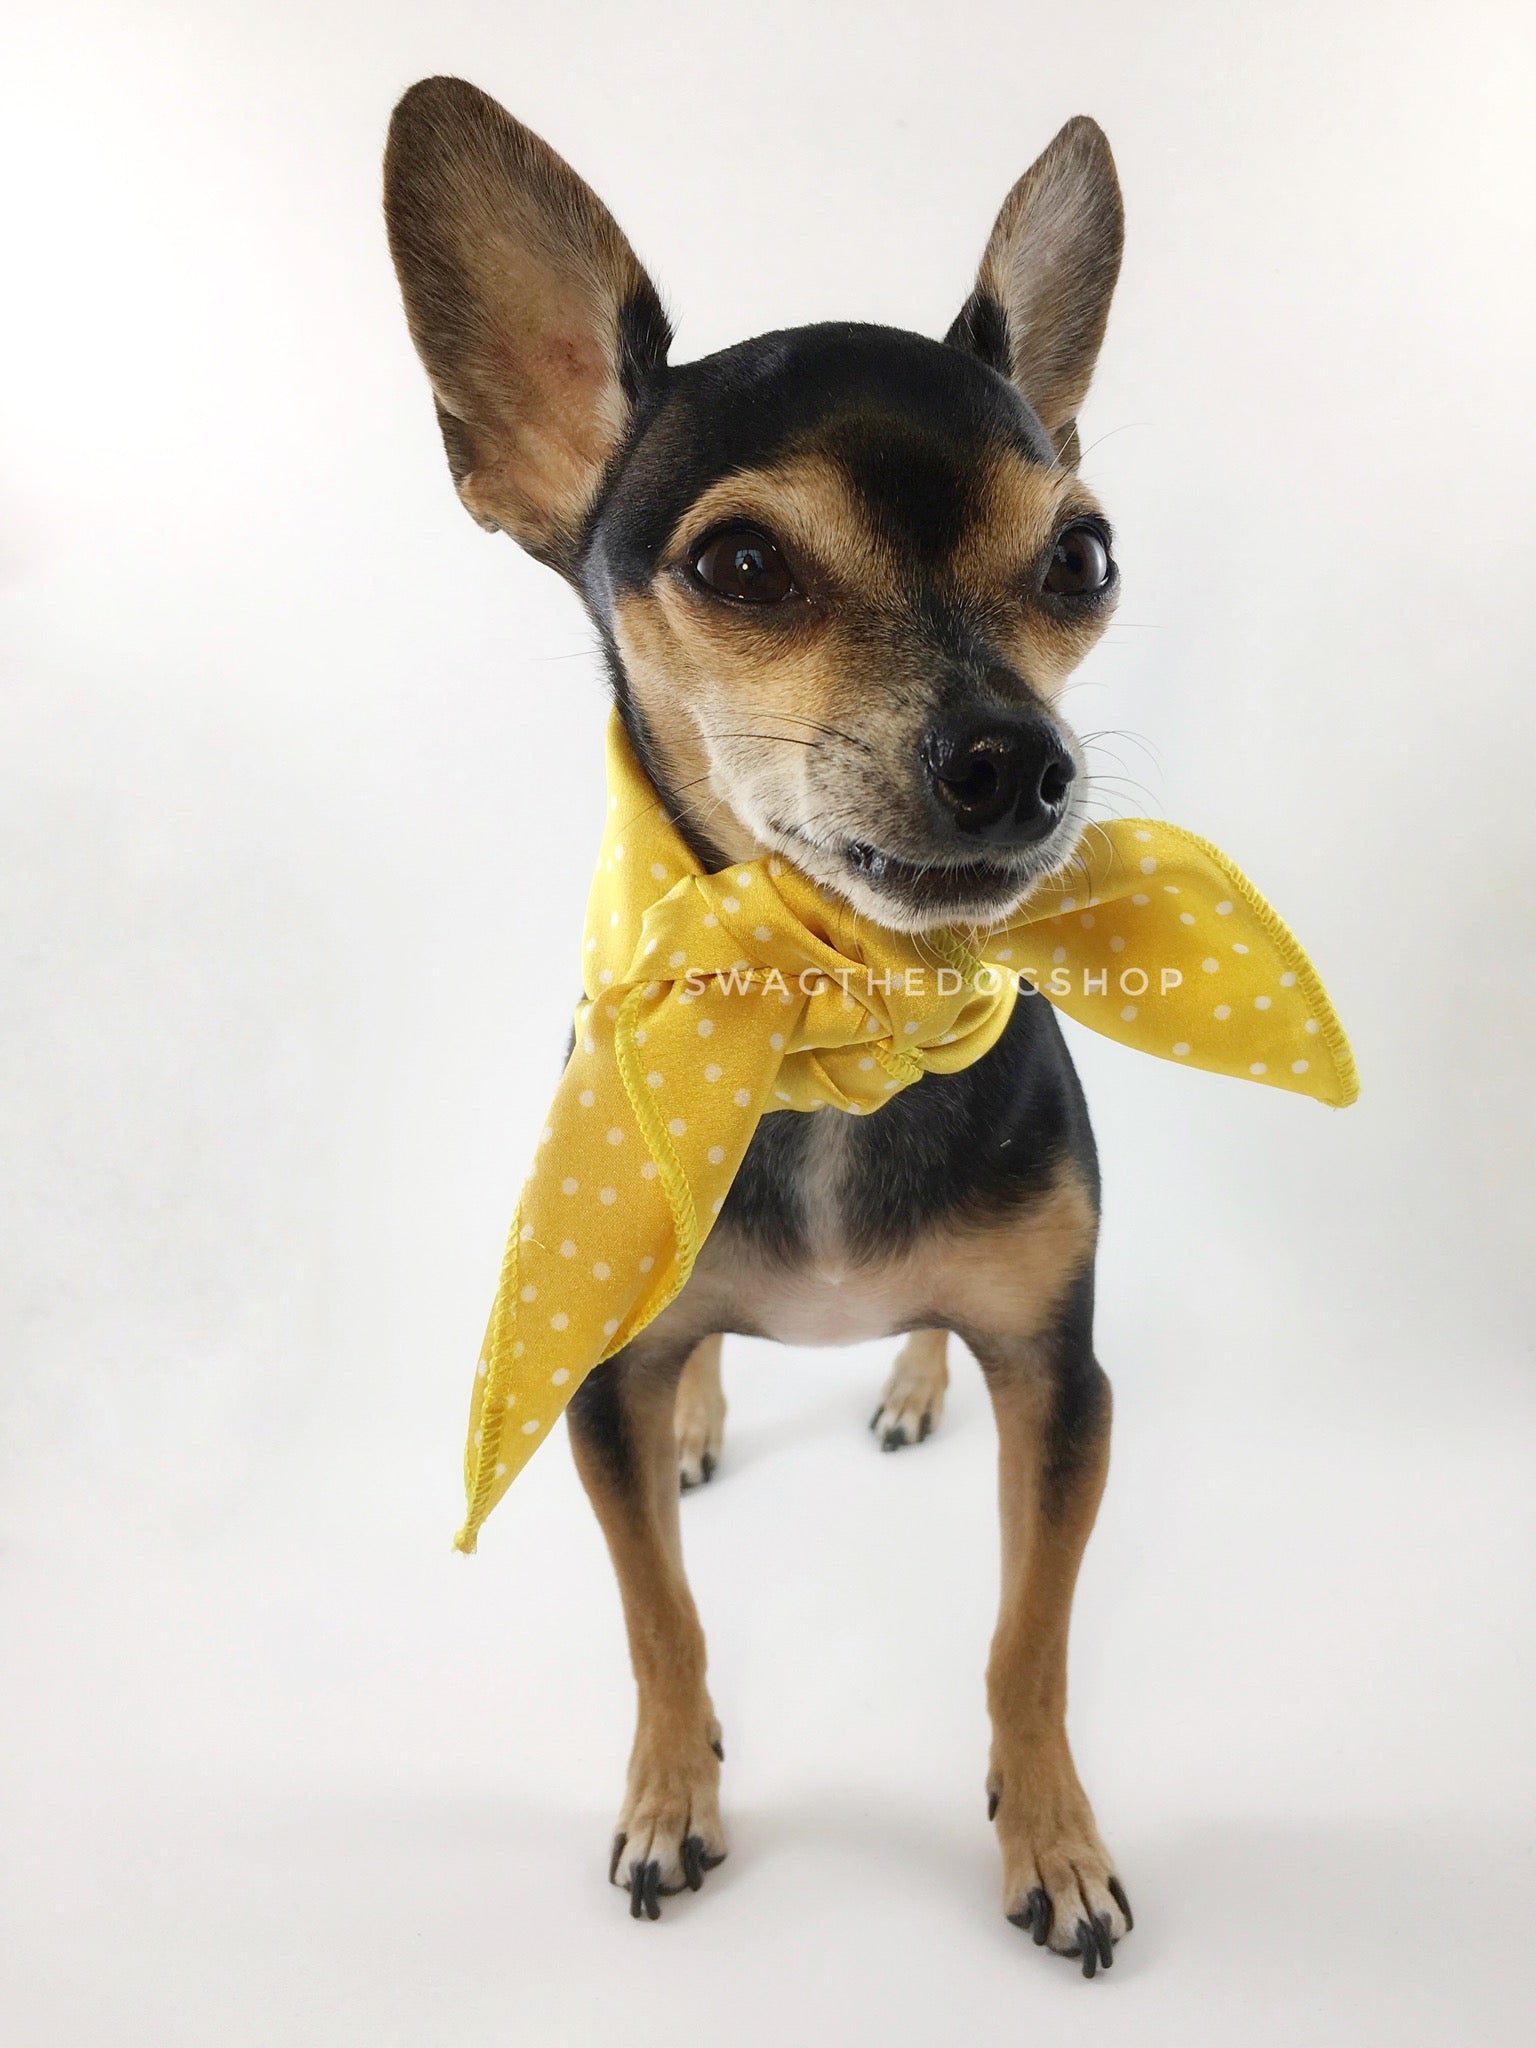 Polka Itty Bitty Sunny Yellow Swagdana Scarf - Full Frontal View of Cute Chihuahua Wearing Swagdana Scarf as Neck Scarf. Dog Bandana. Dog Scarf.